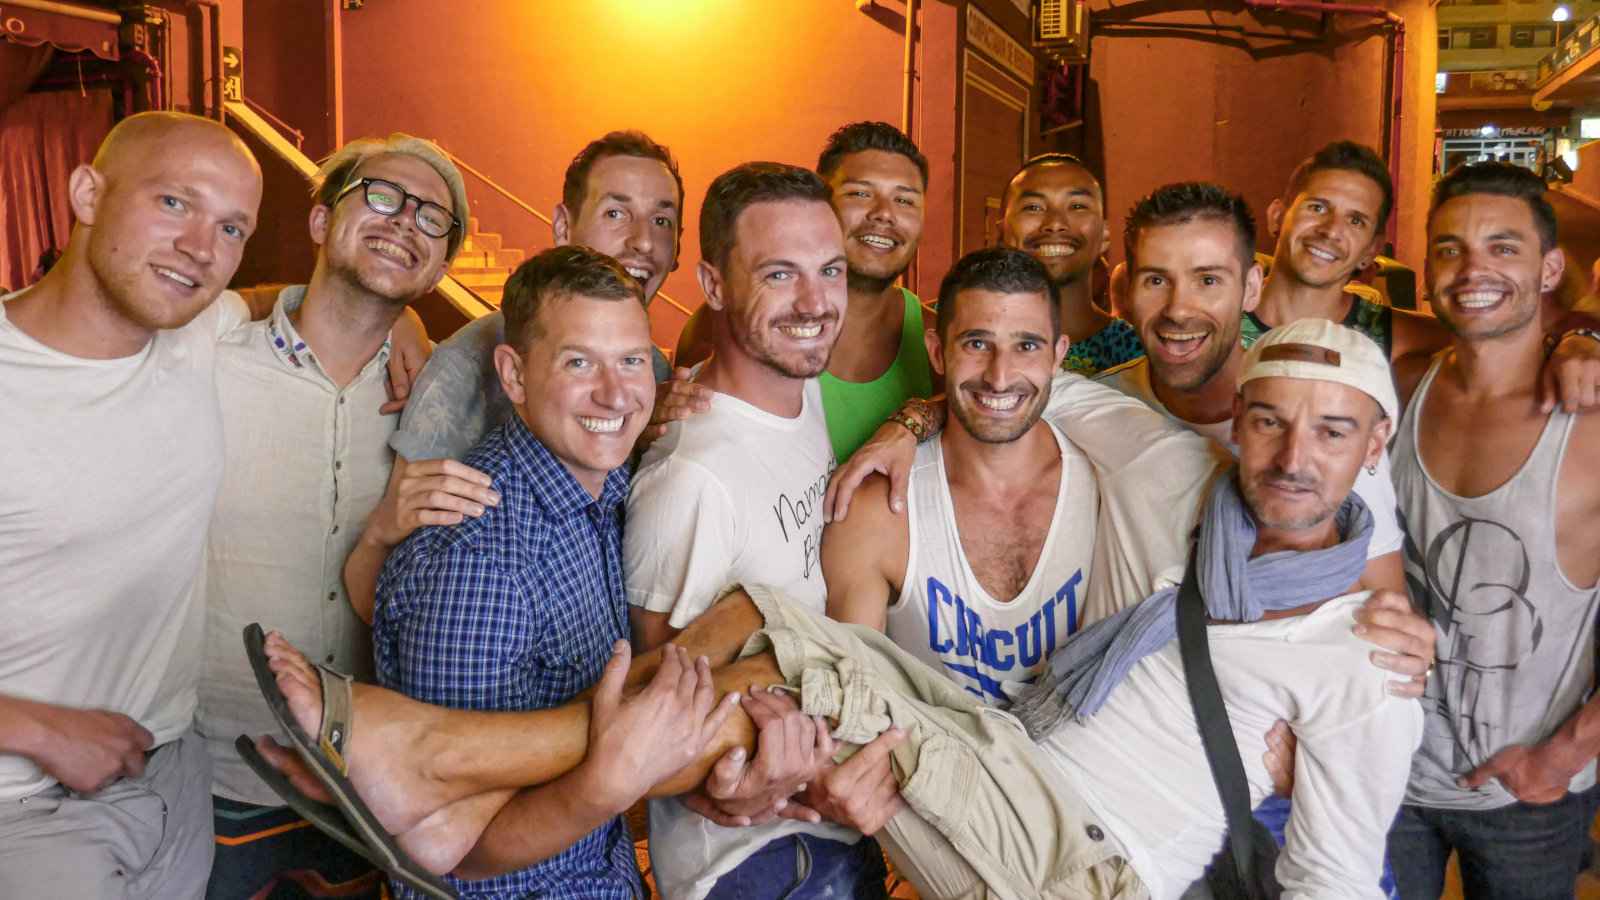 Gran Canaria has a fabulous gay scene centred around the Yumbo shopping centre